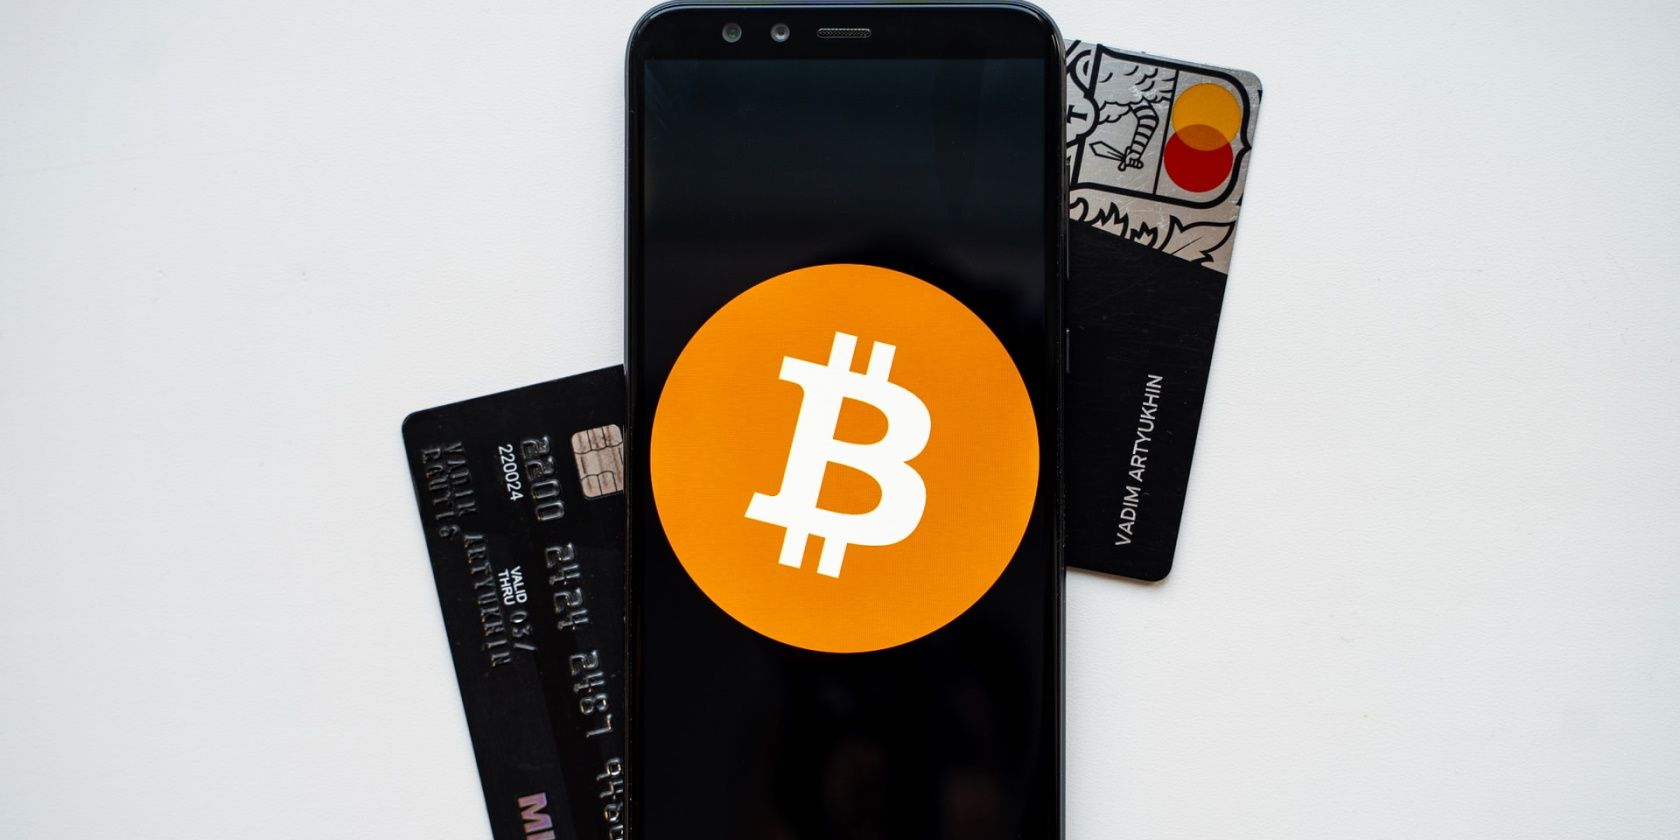 A mobile phone with a Bitcoin symbol superimposed on top